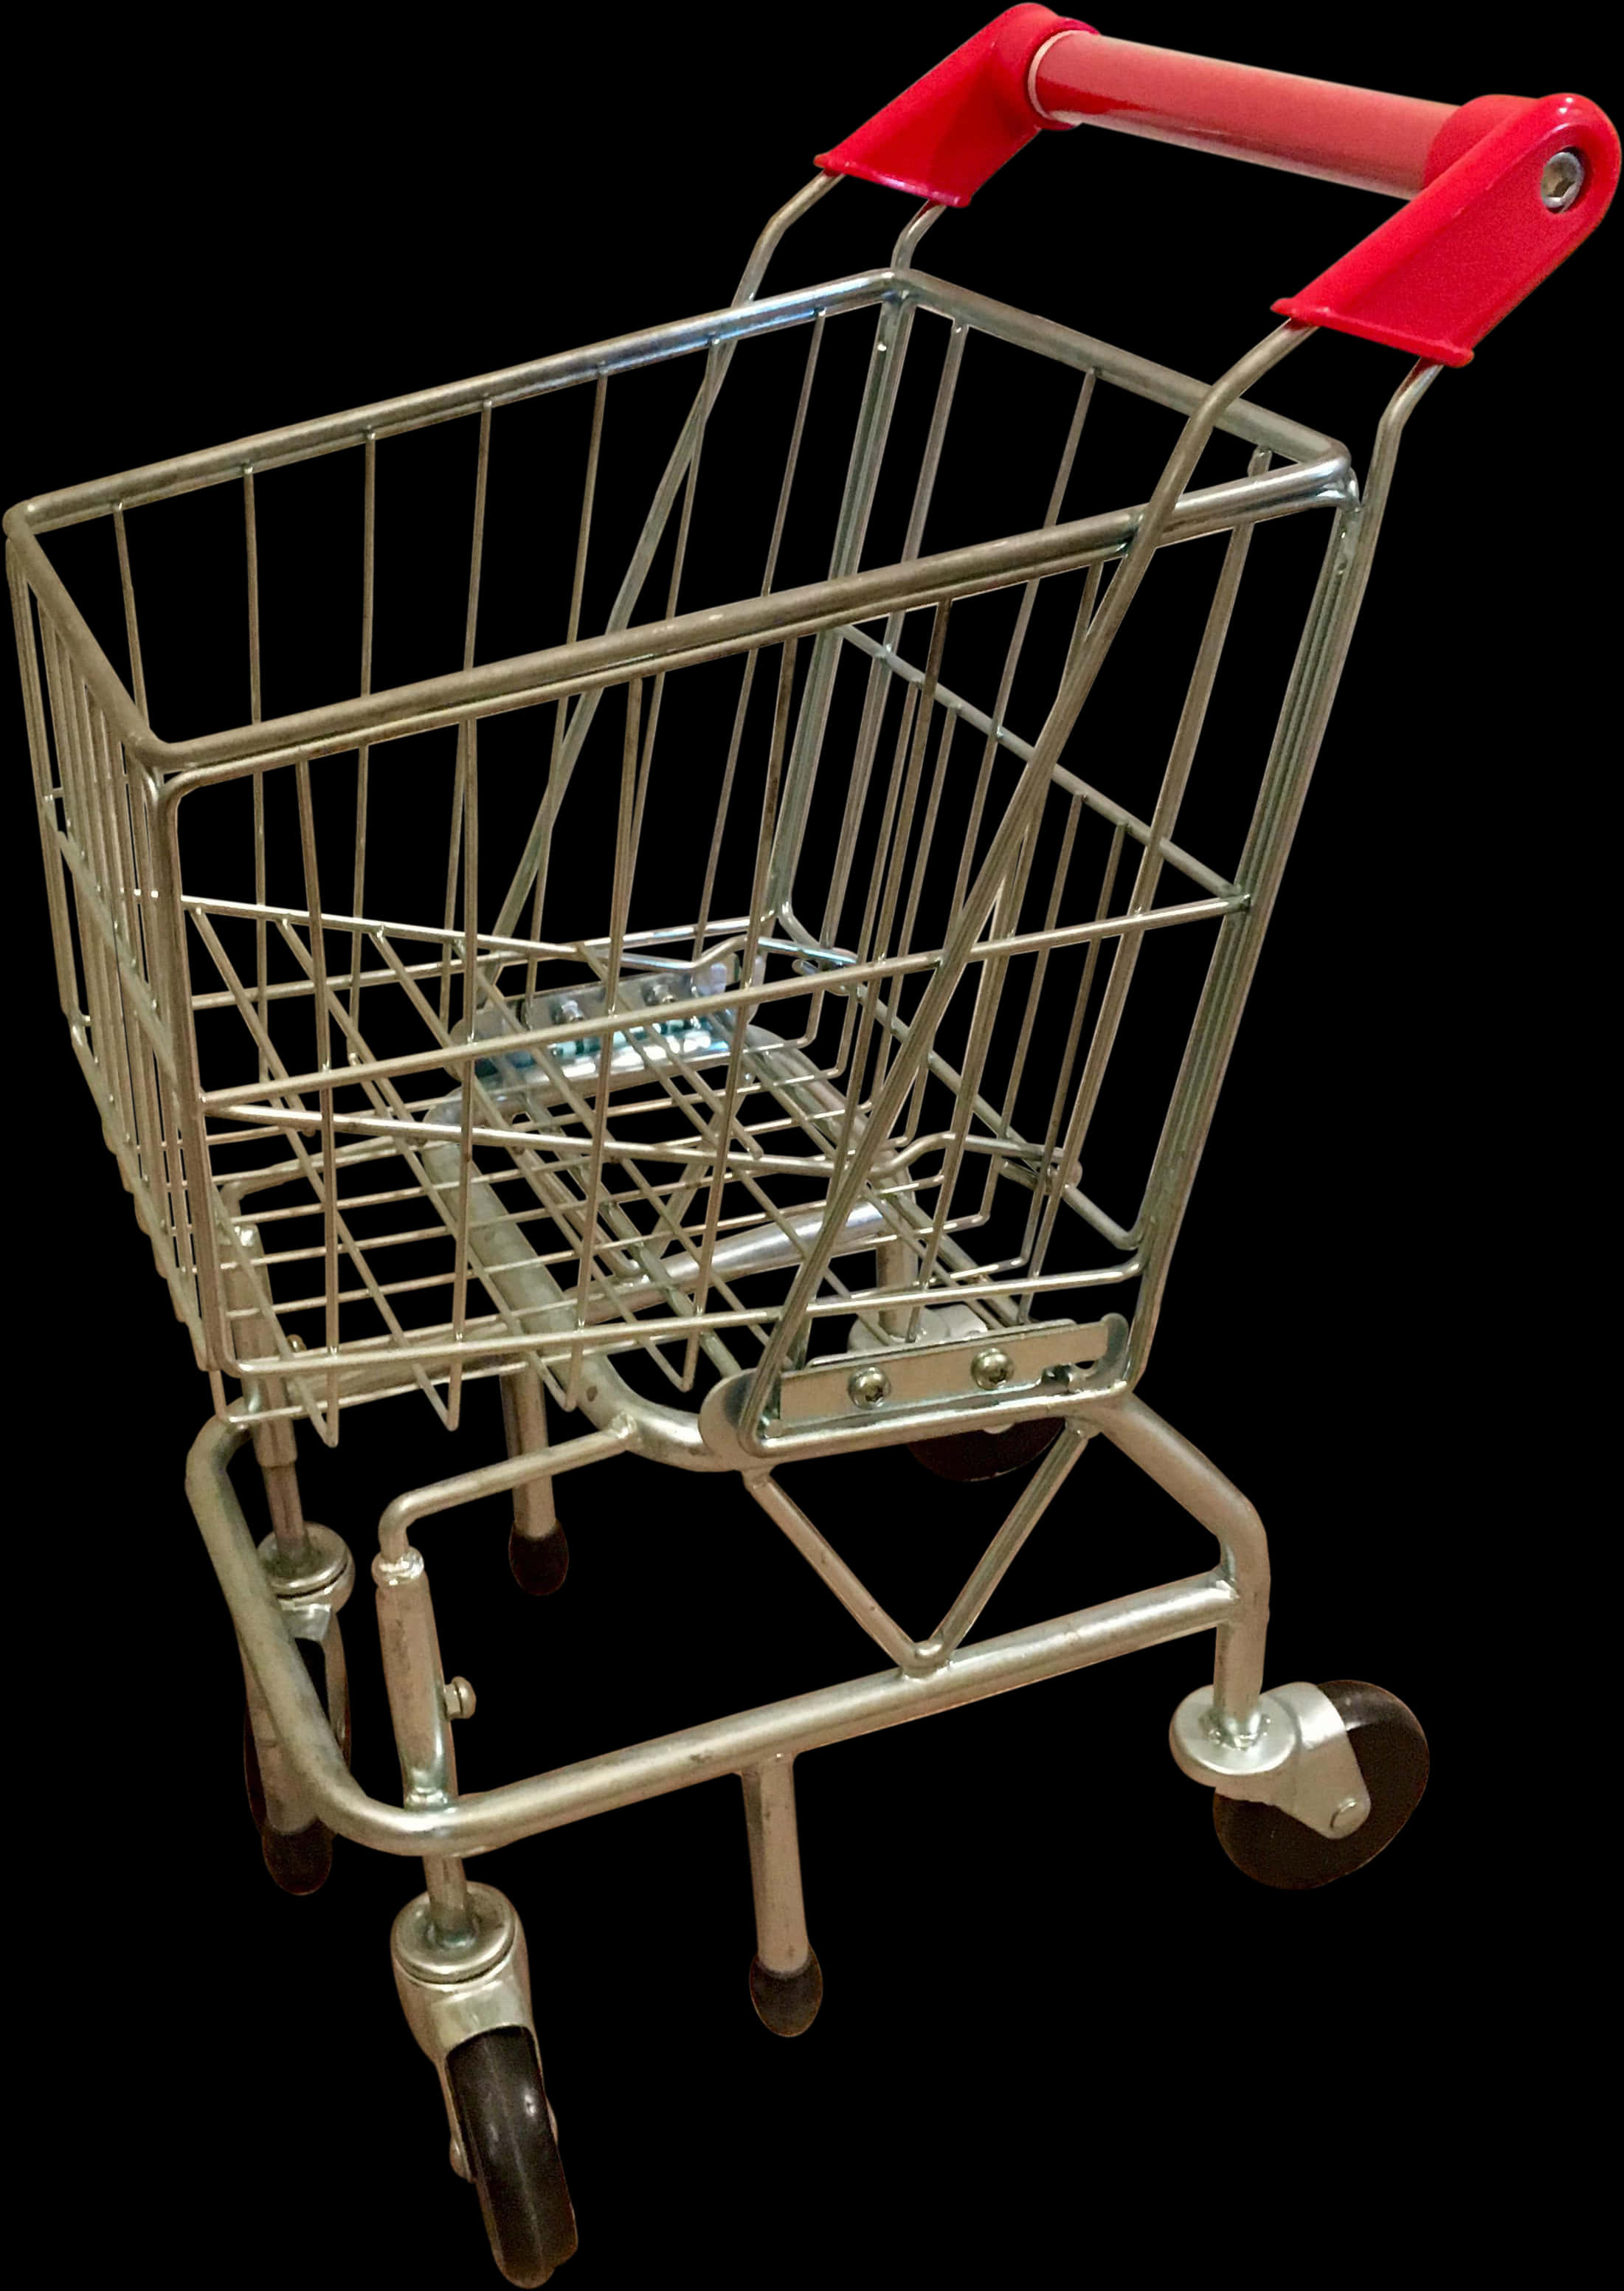 Empty Metal Shopping Cartwith Red Handles